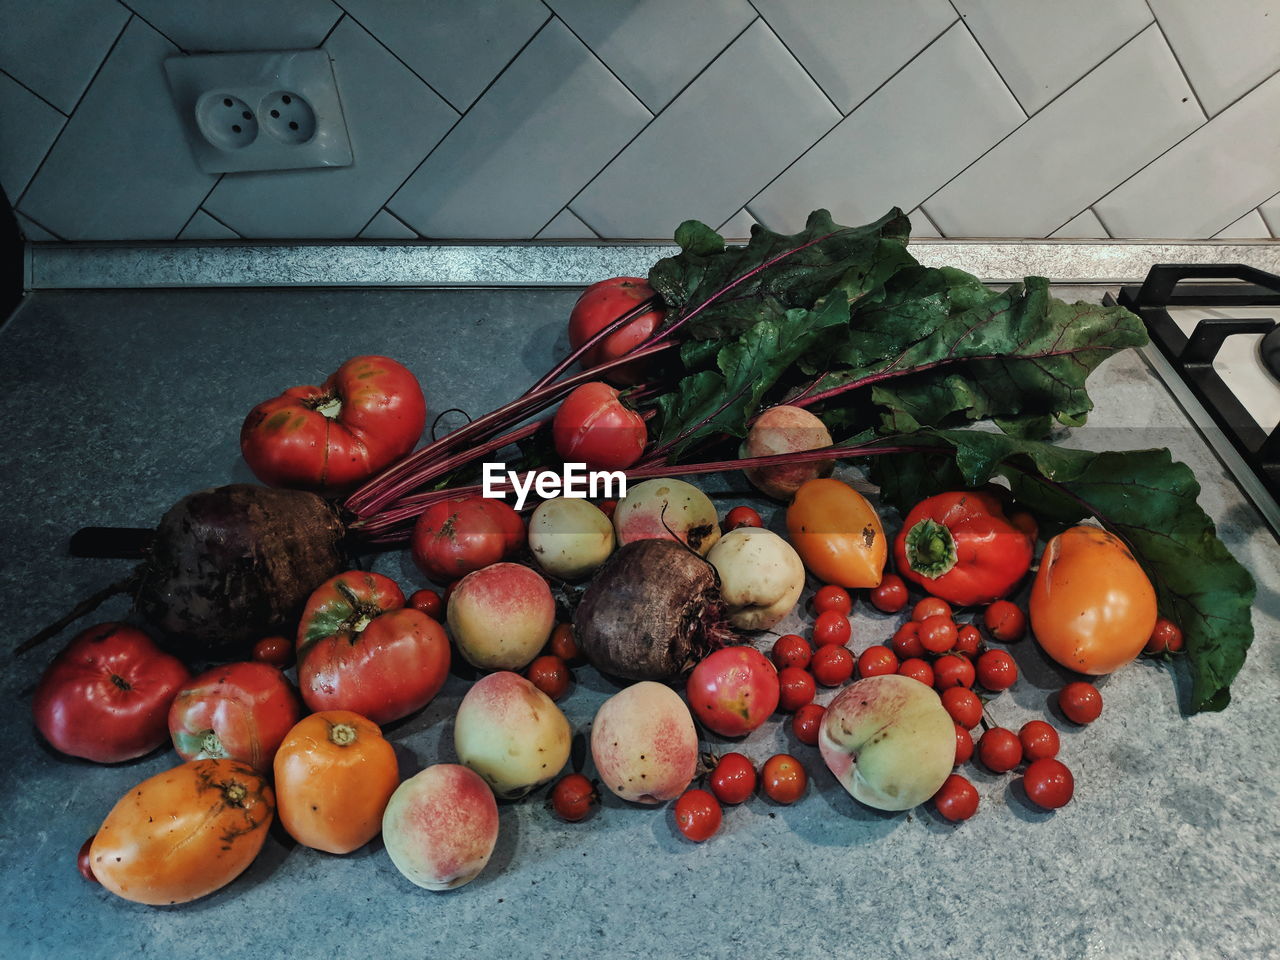 HIGH ANGLE VIEW OF APPLES AND VEGETABLES ON FLOOR